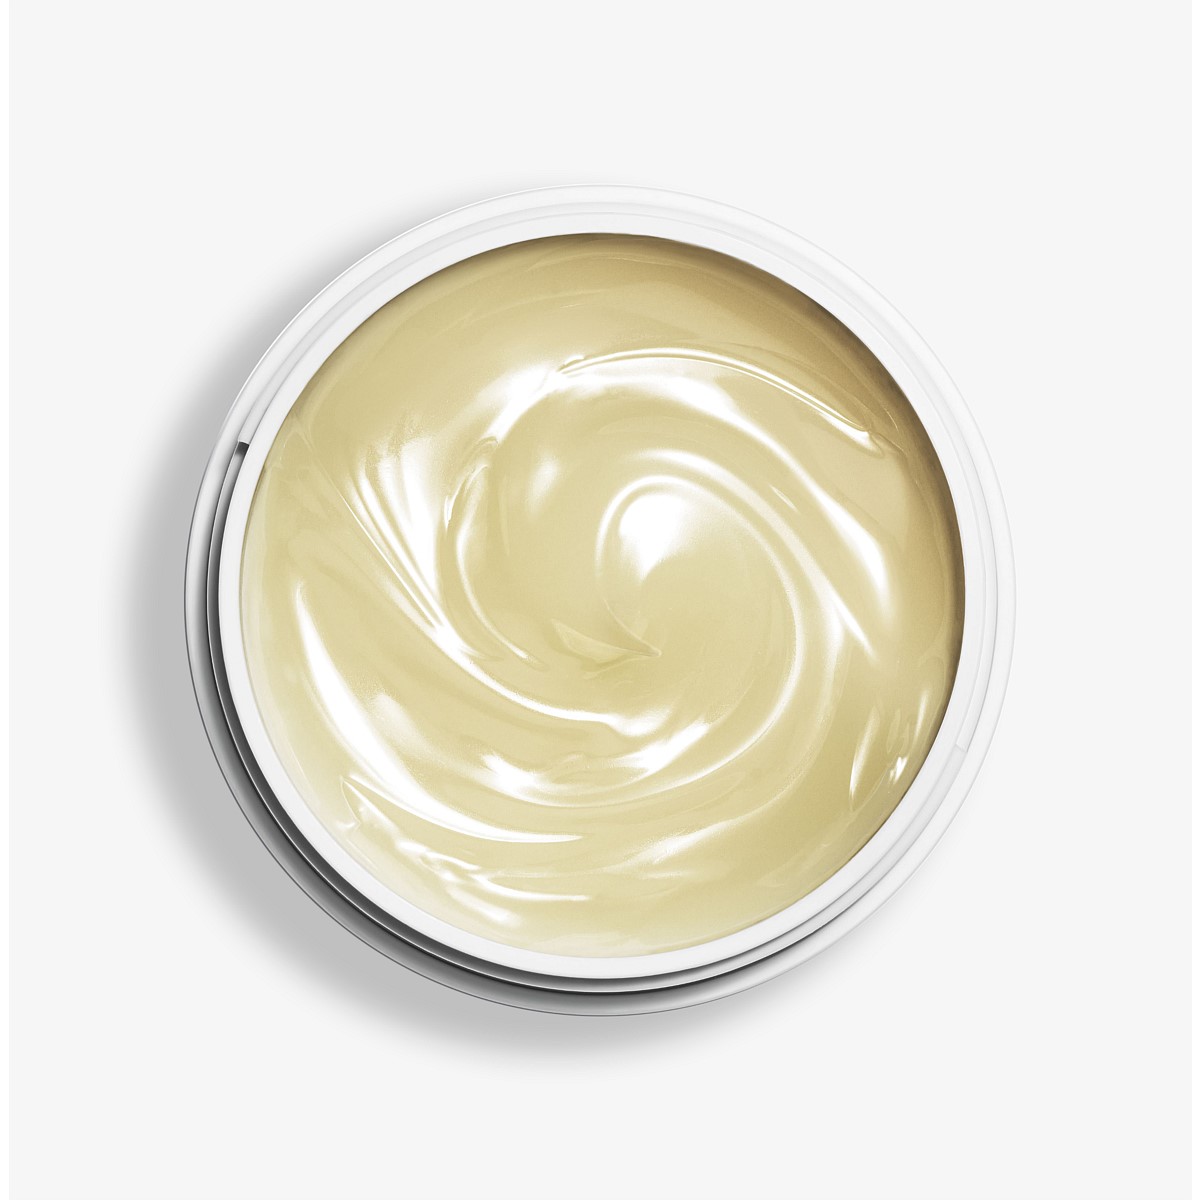 Botanical Cleanser Caulis is an organic wateractivated cleansing balm.